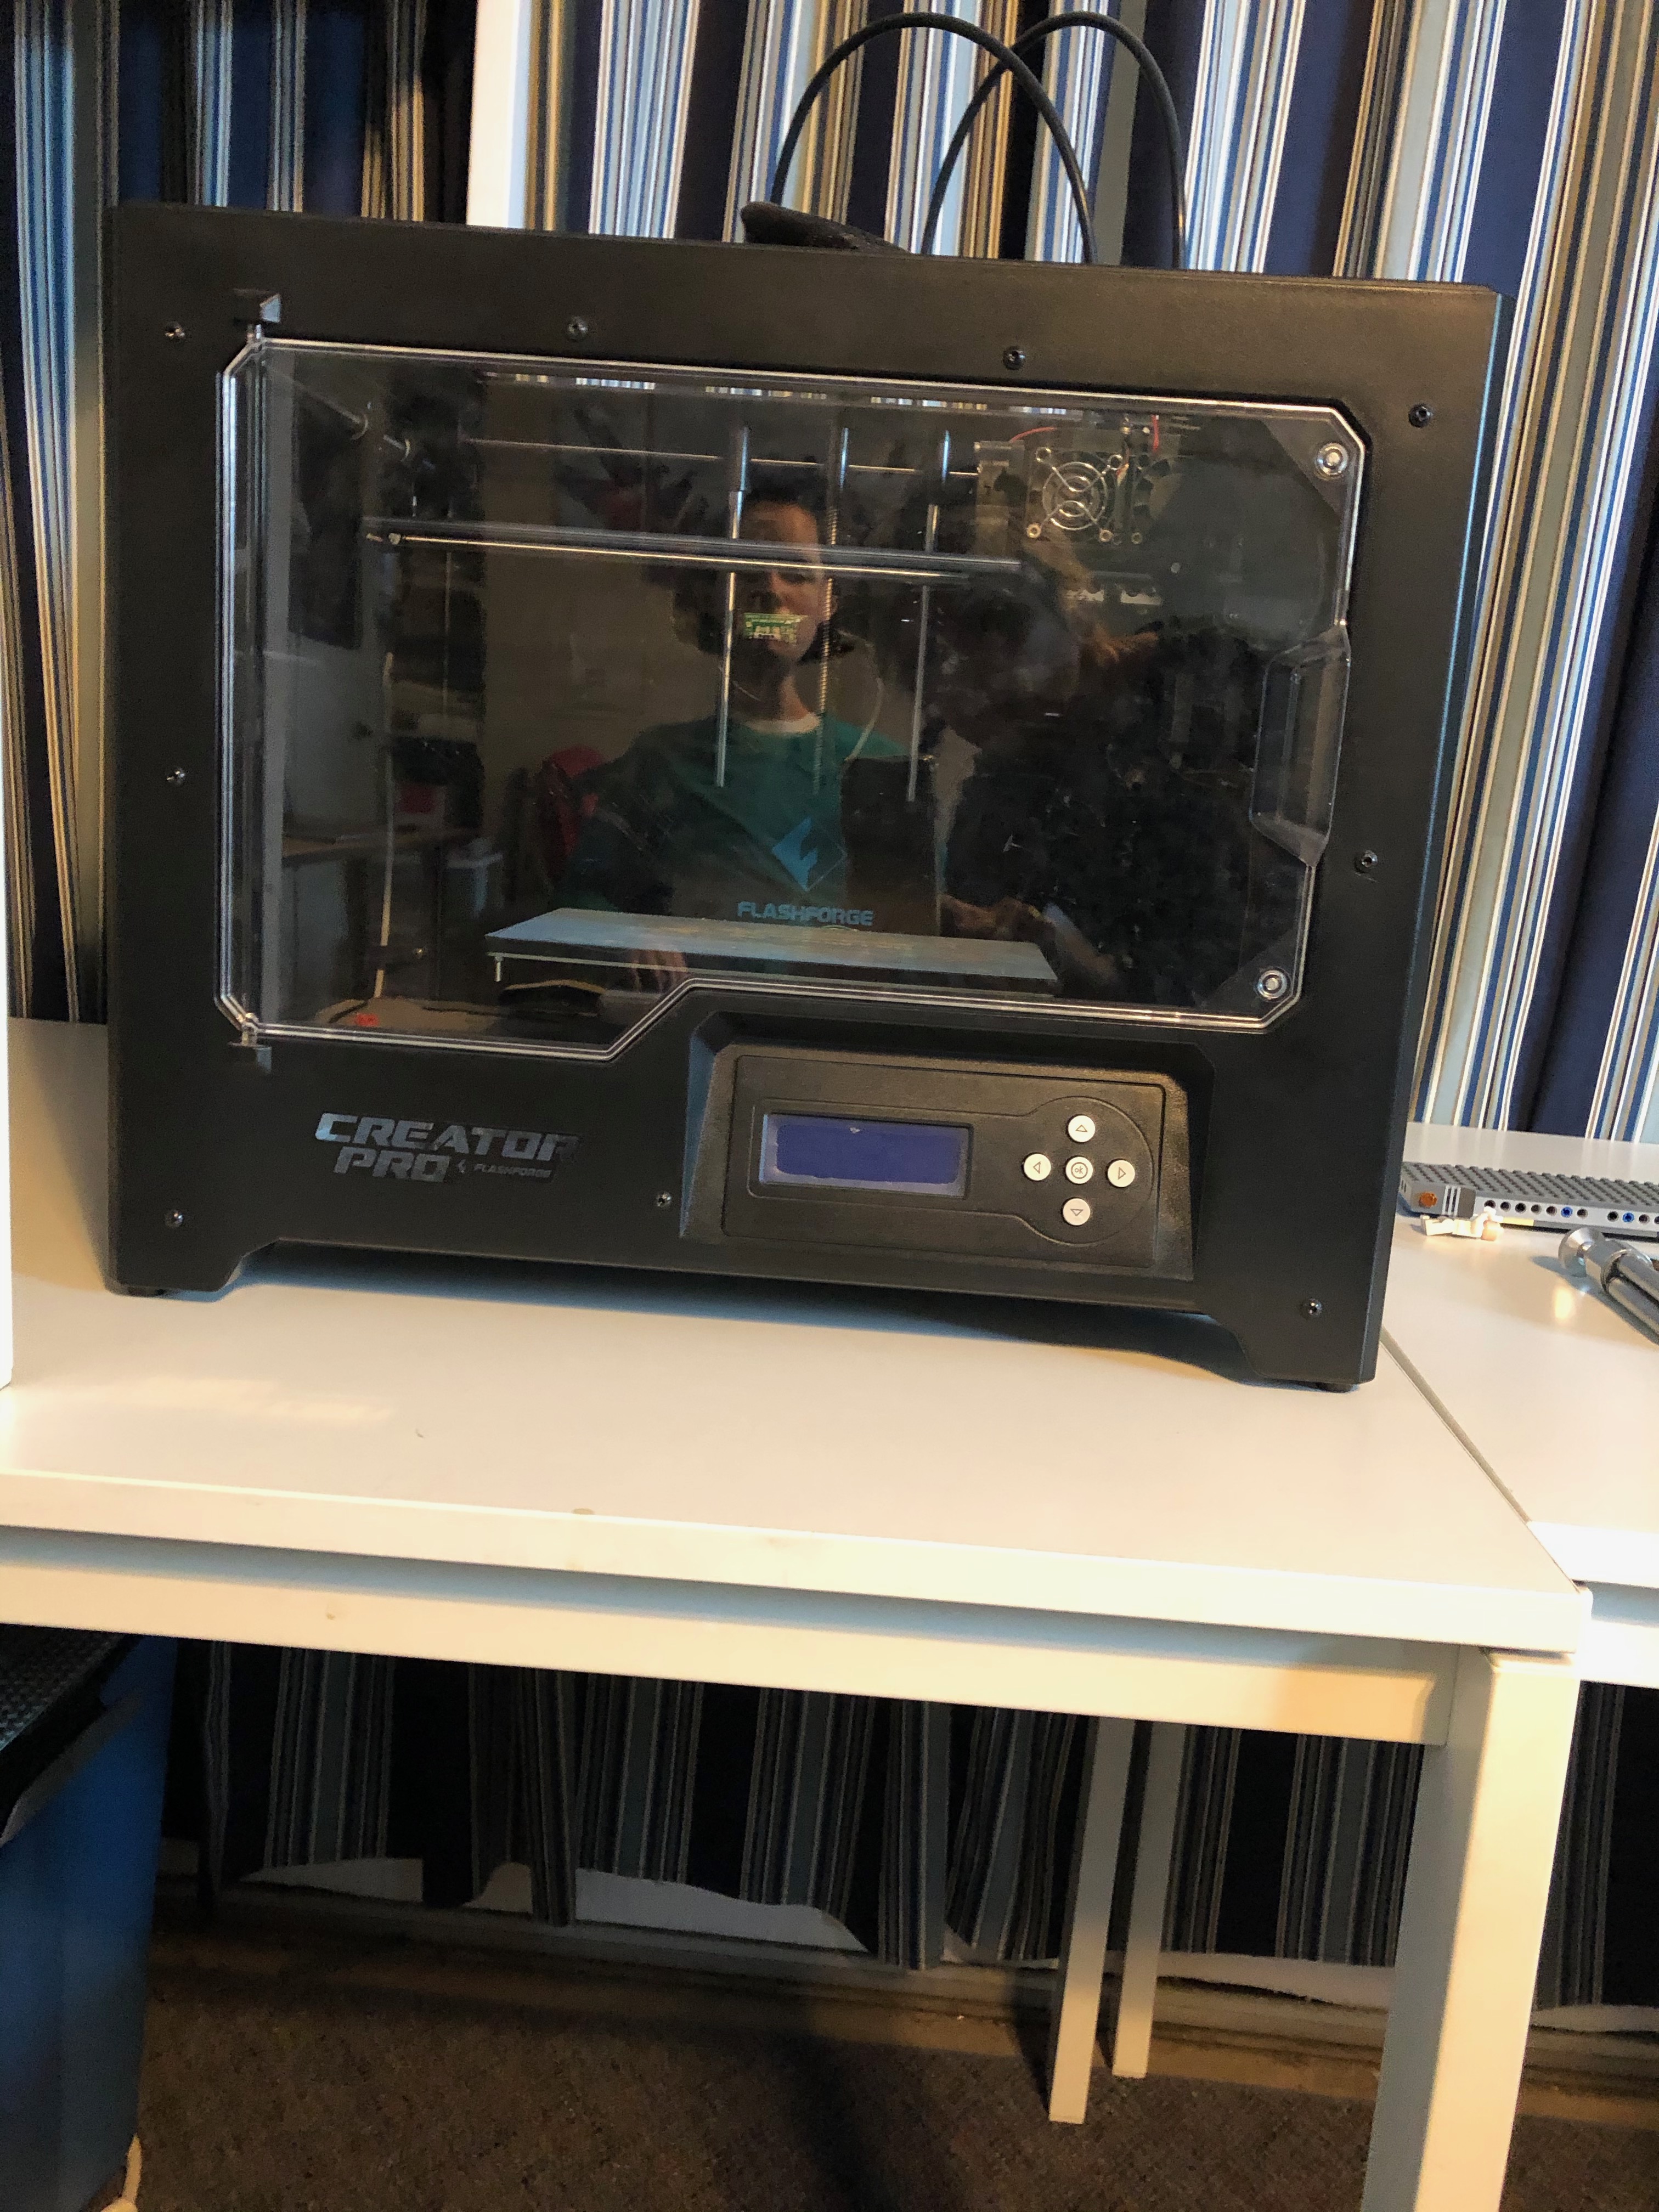 The 3D Printer of the Mancave